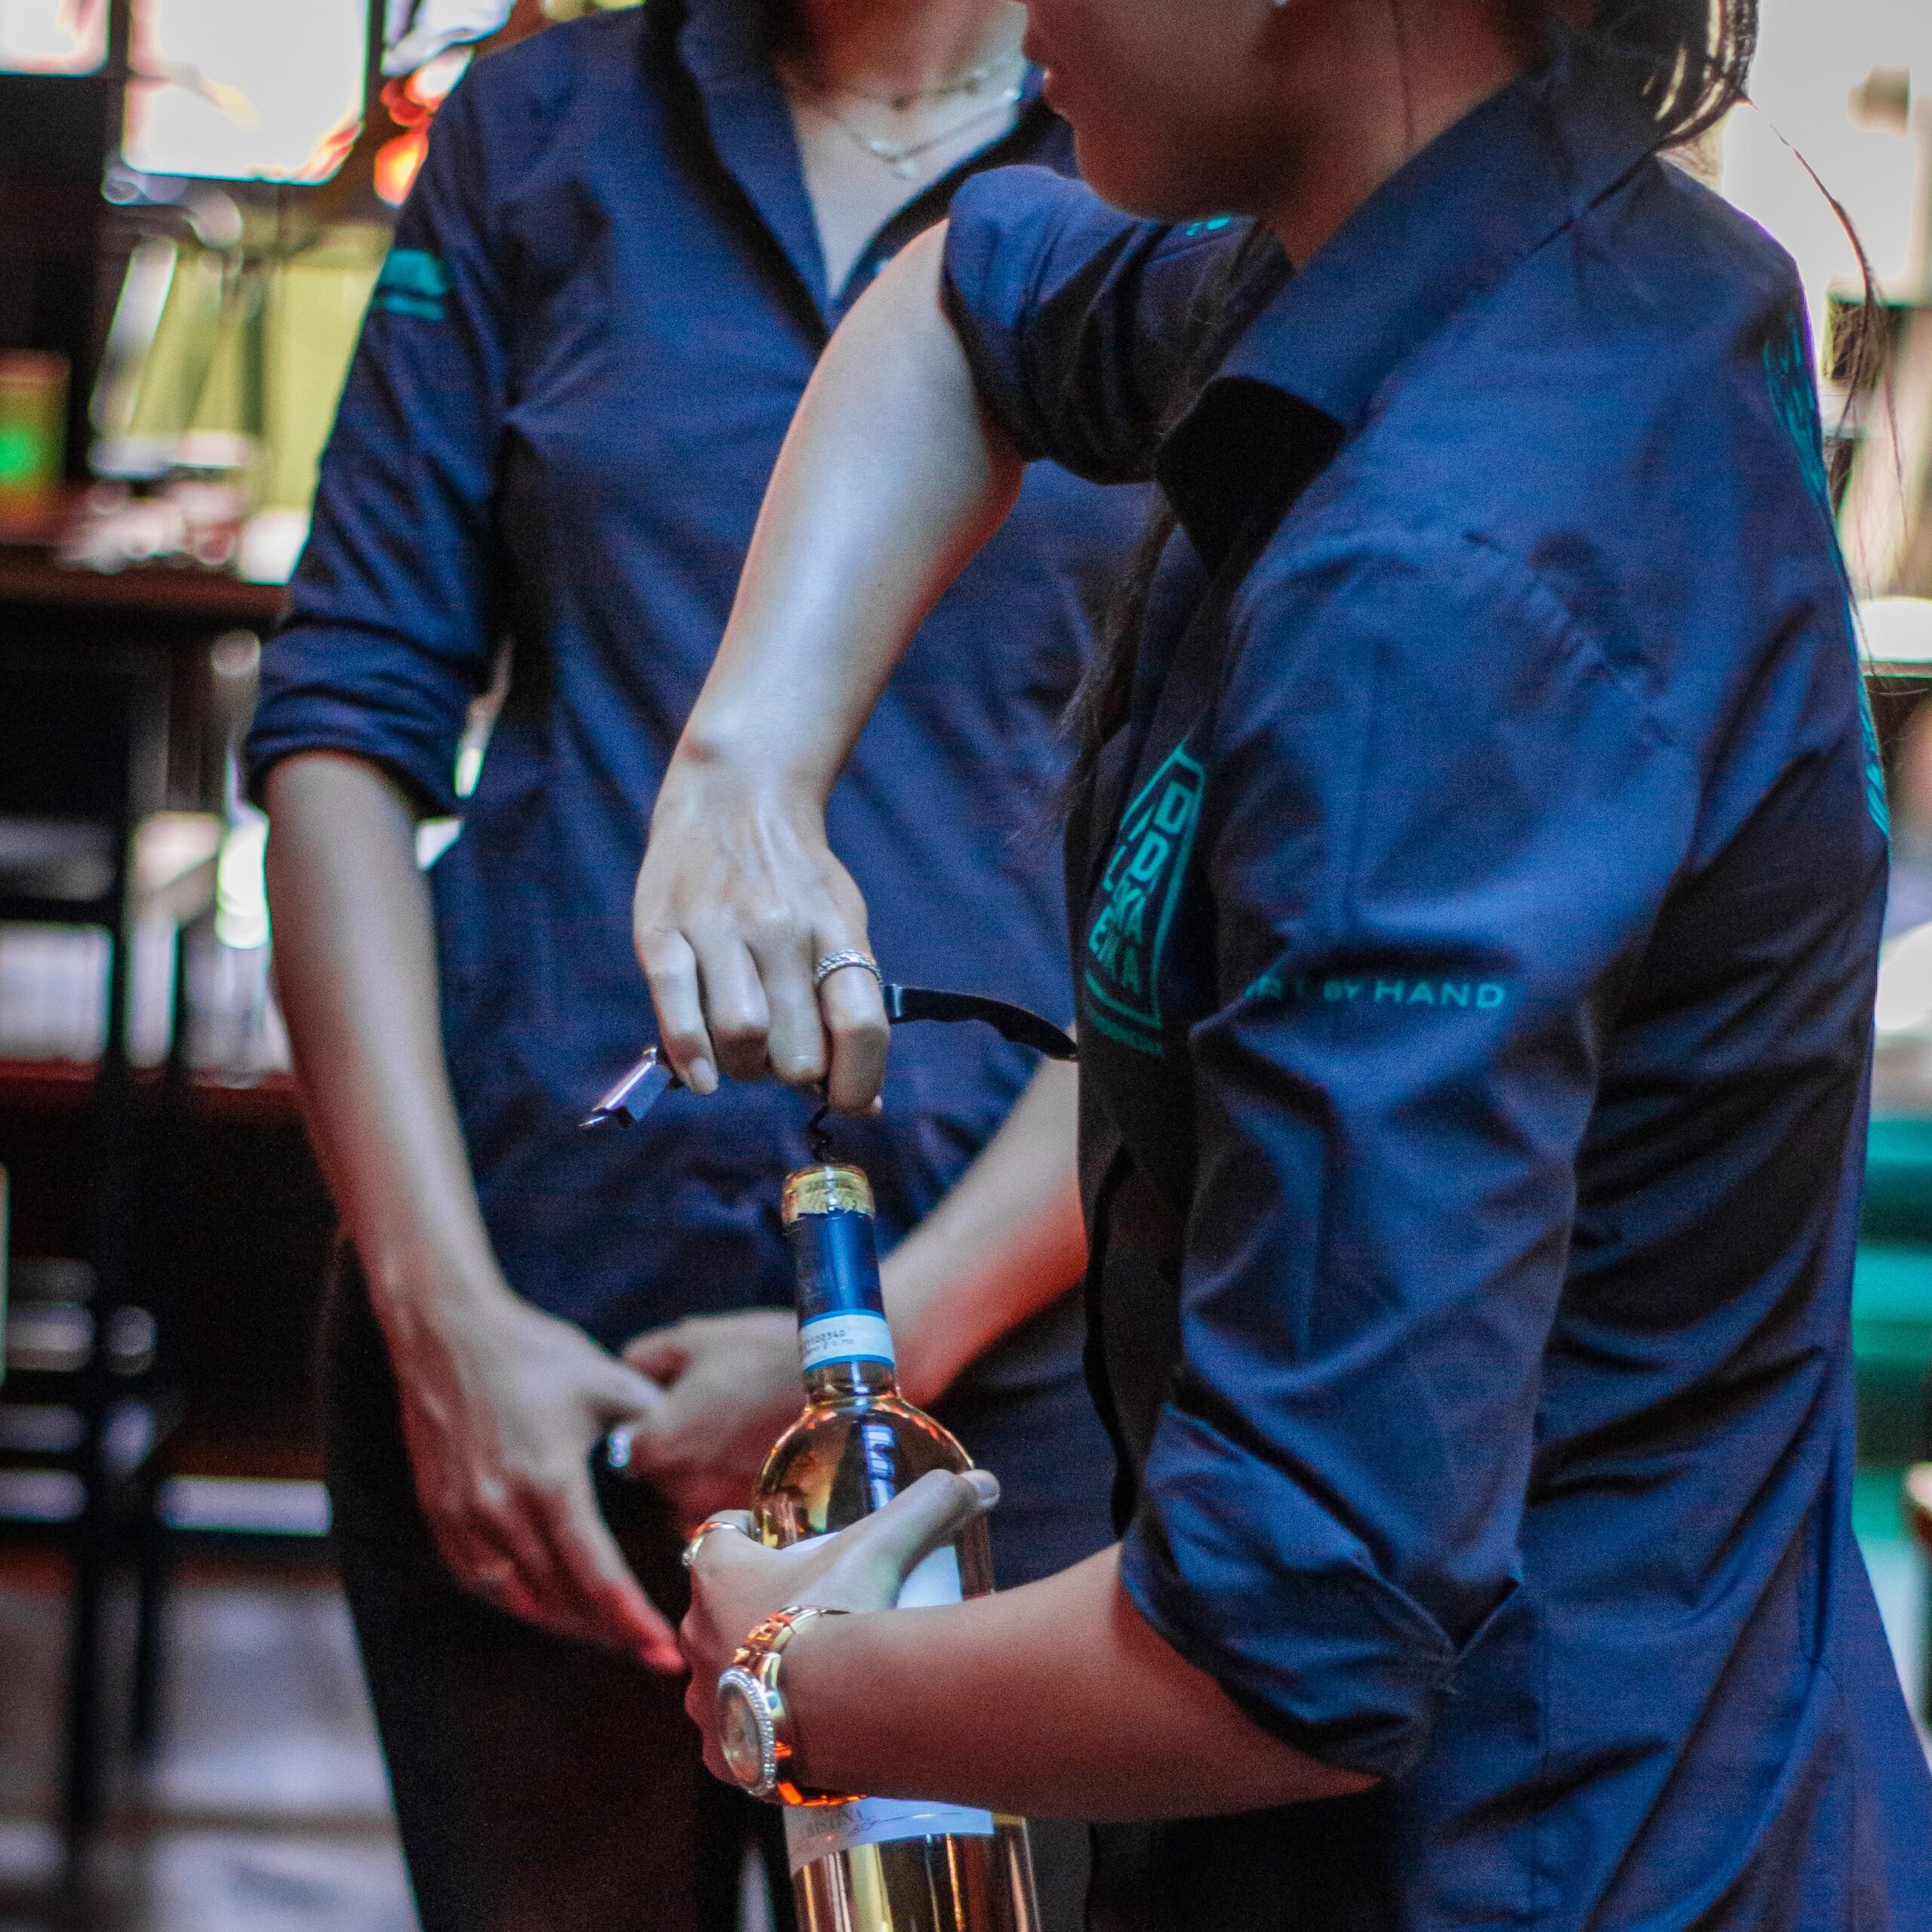 Two women wearing uniforms while bartending. Elevate your staff with custom uniforms from Stamford Uniform and Linen.